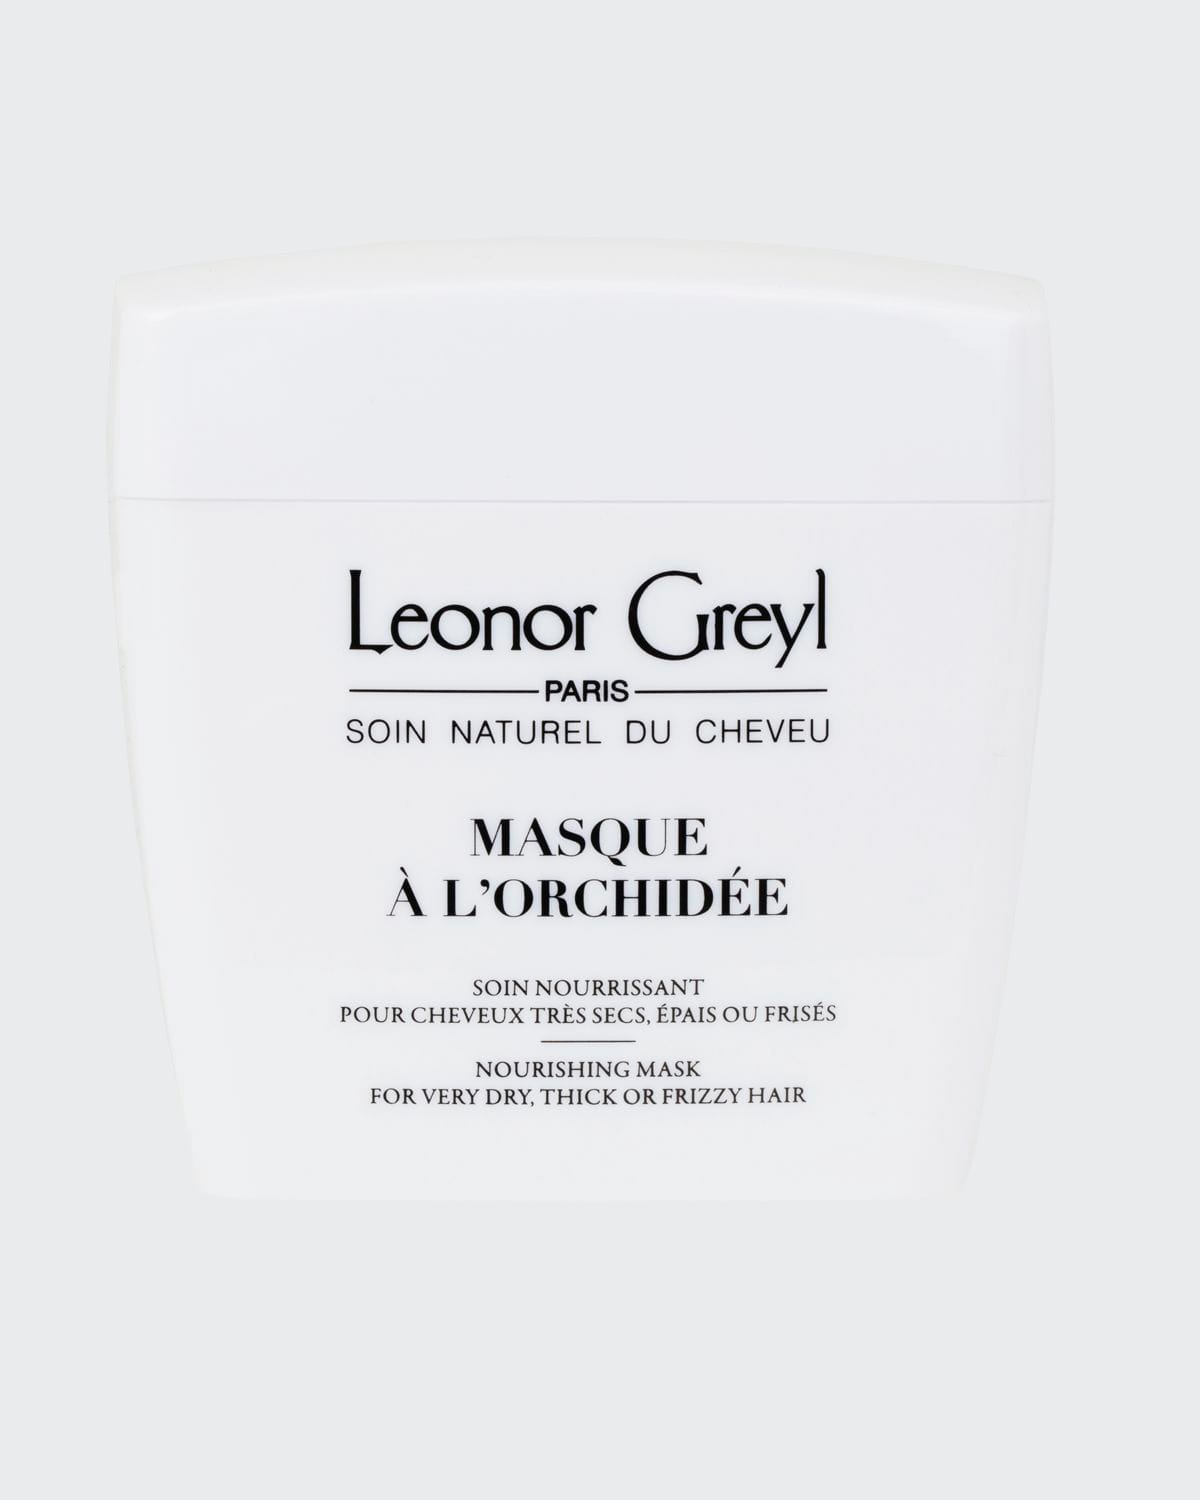 Leonor Greyl Masque a L'Orchidee (Nourishing Mask for Very Dry, Thick, or Frizzy Hair), 7.0 oz./ 200 mL